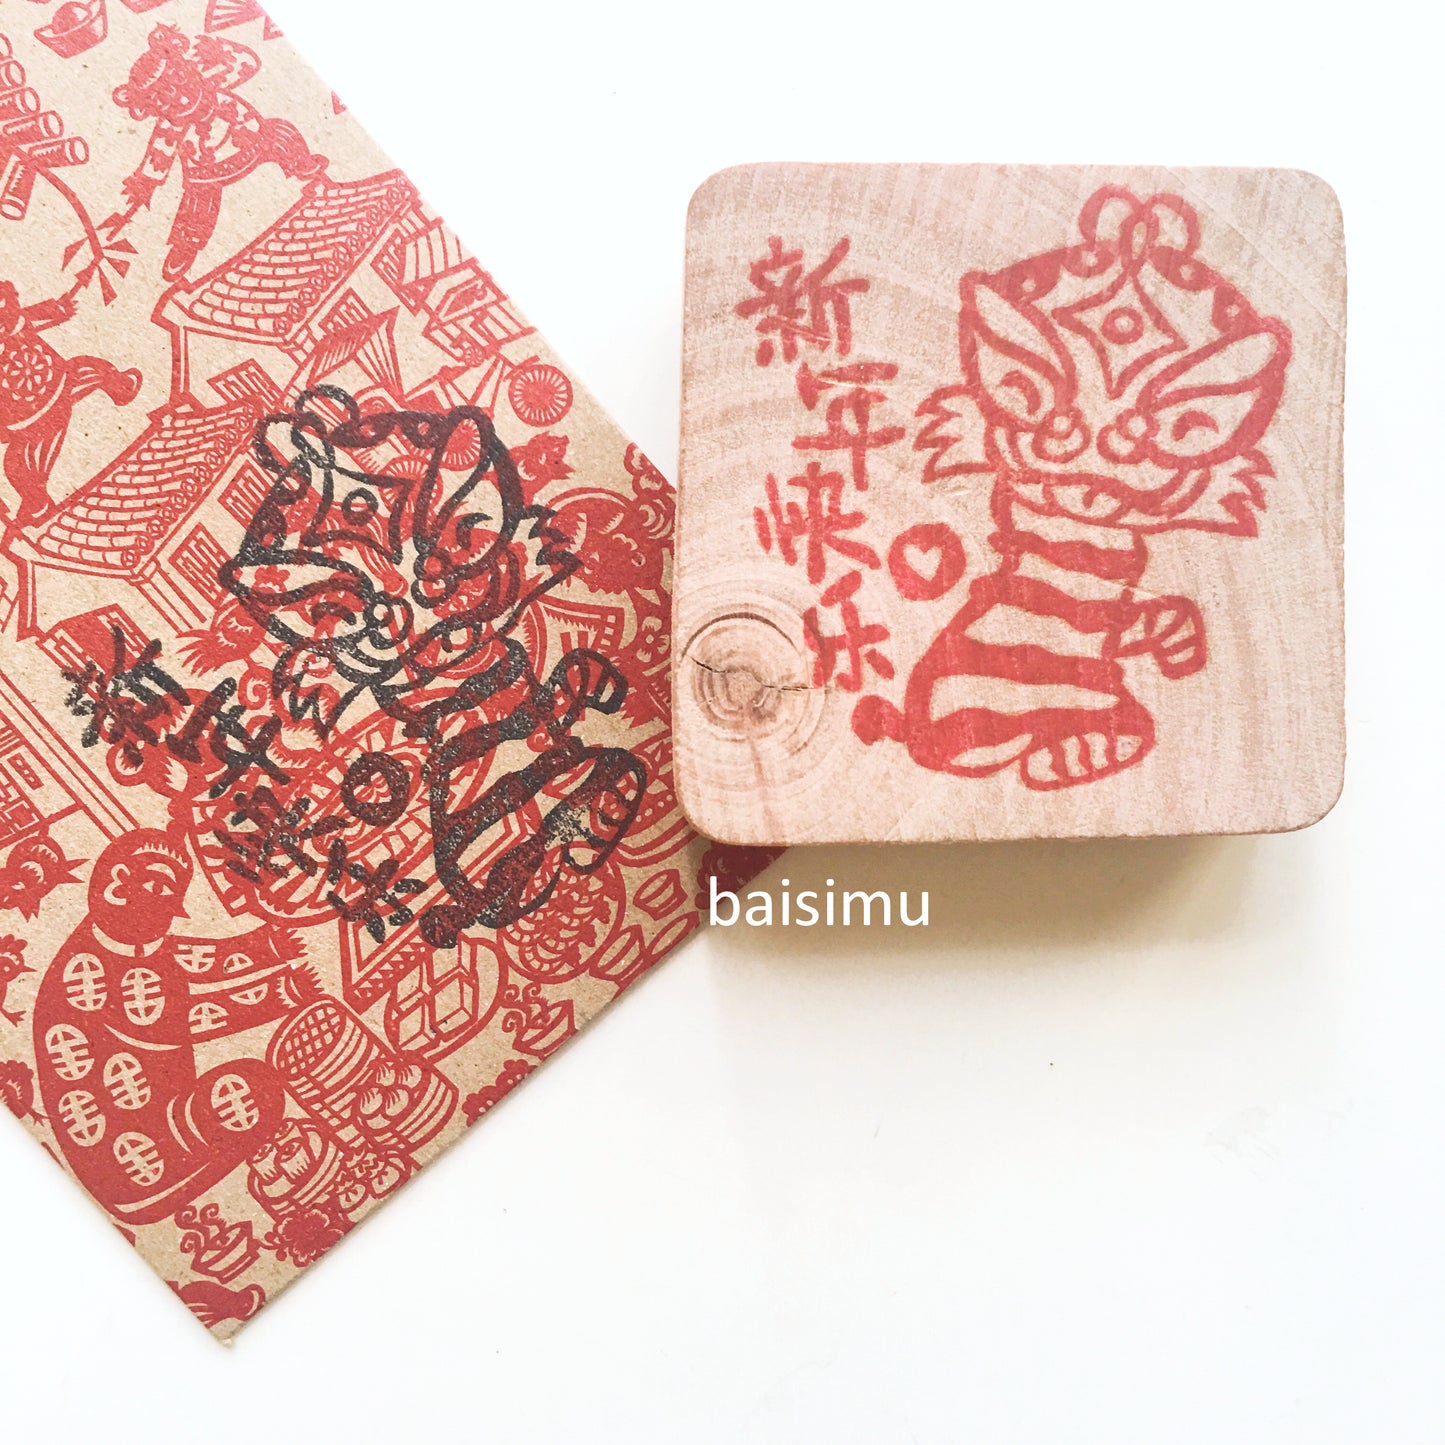 Chinese New Year lion dance stamp